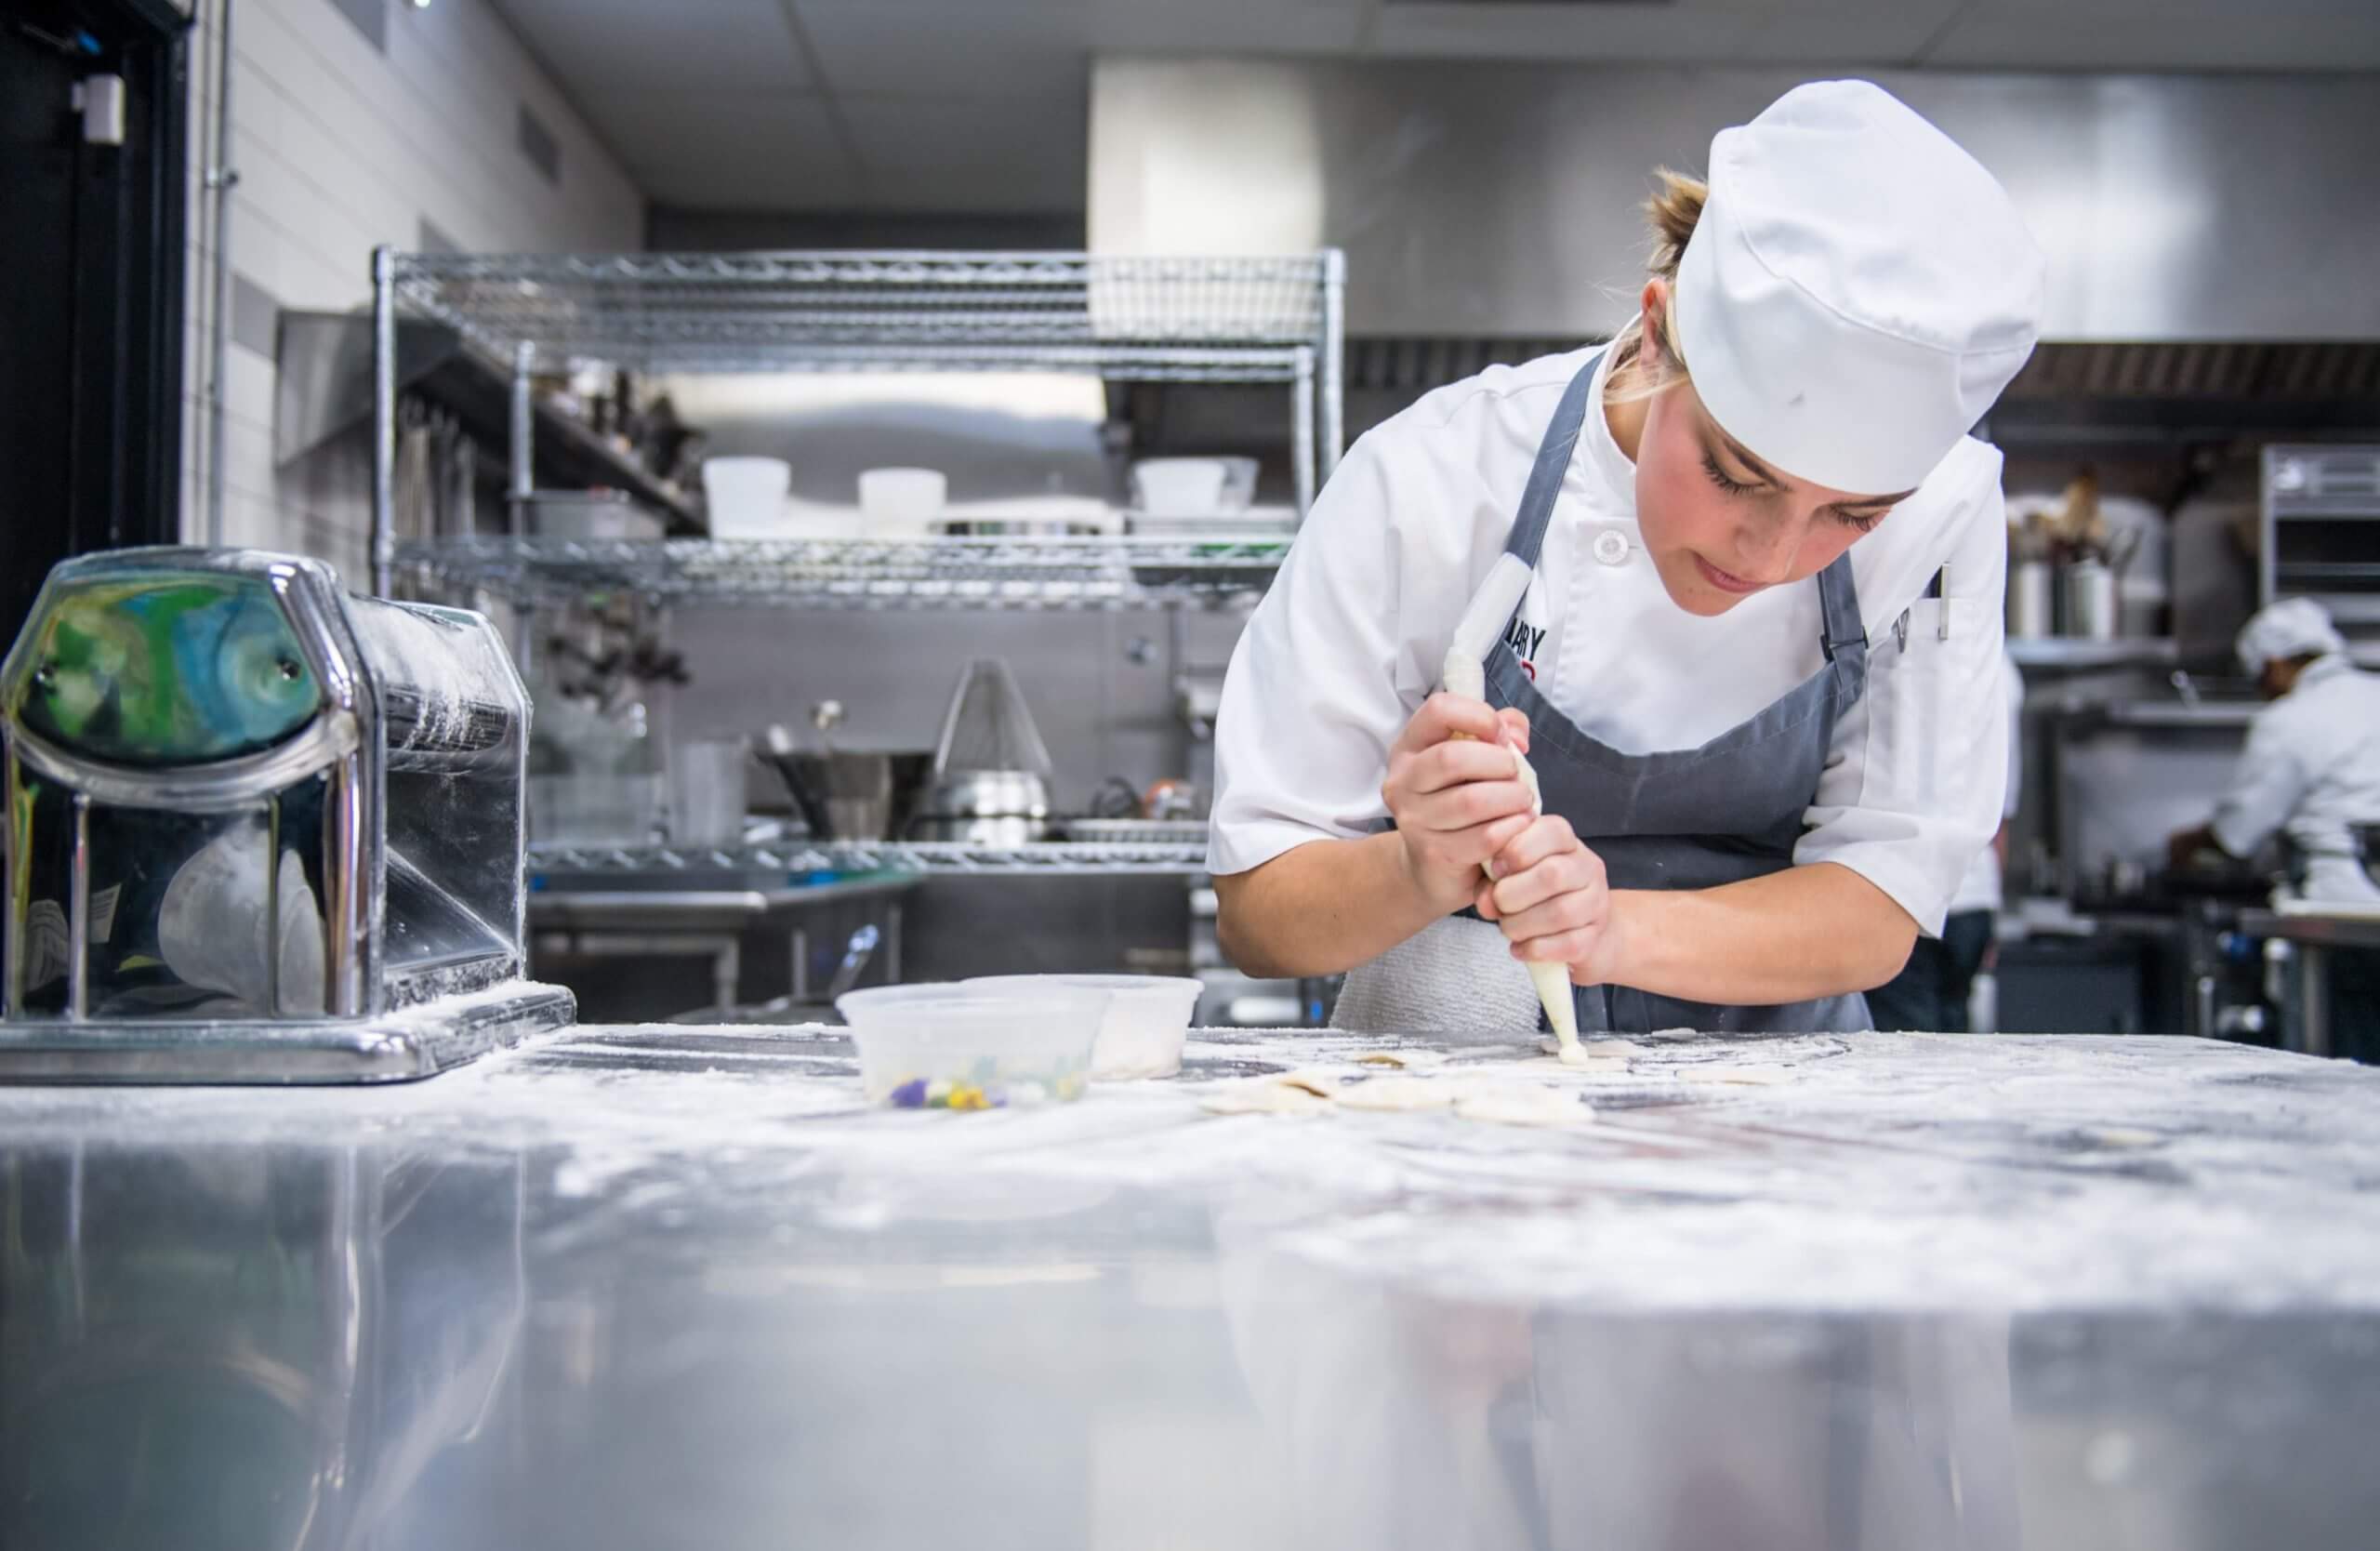 What Should You Know About Pastry Certificate Programs At Bakeology Studio?